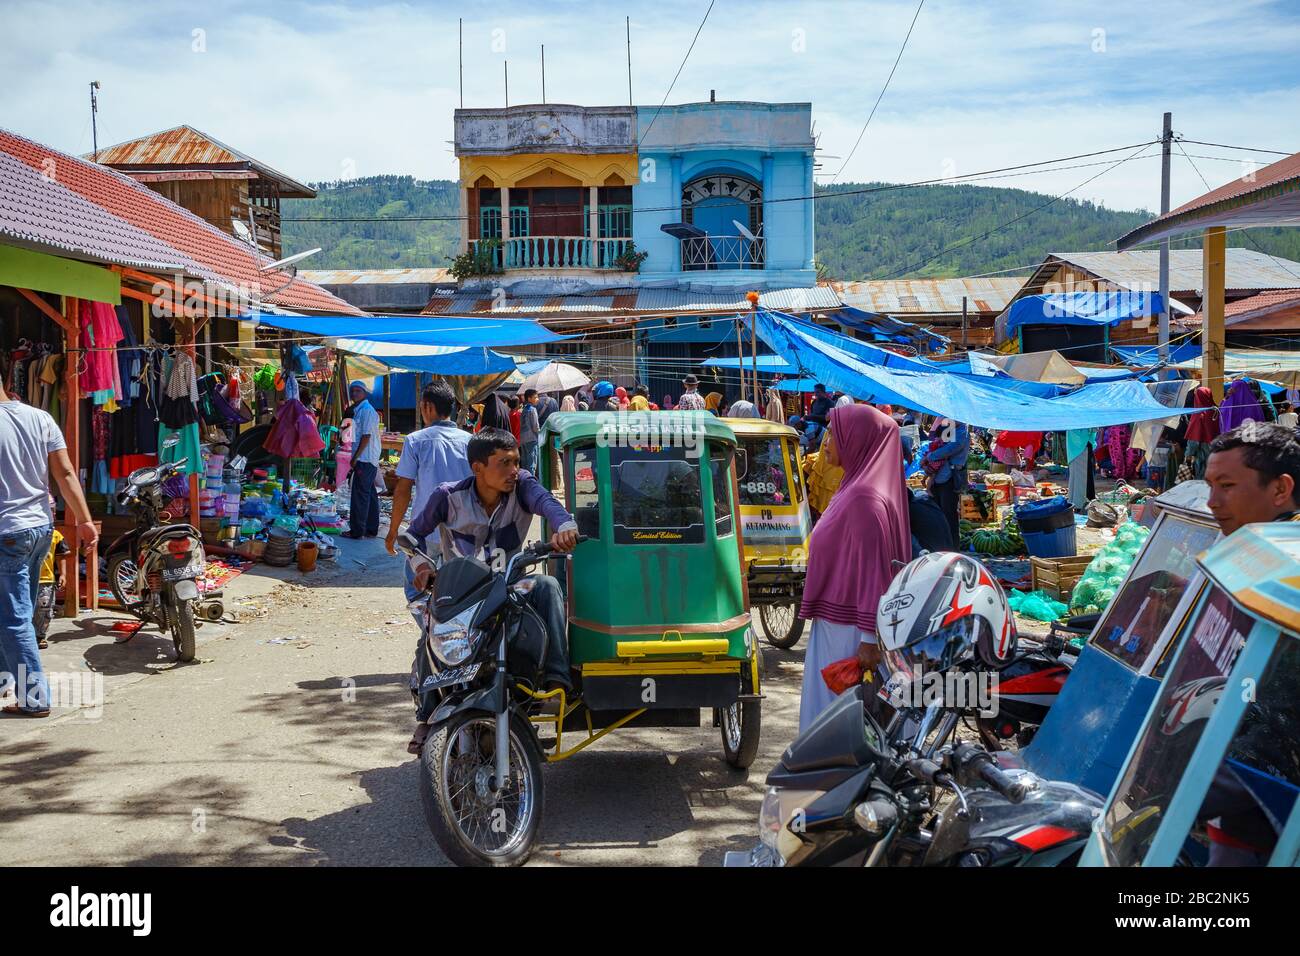 07 June 2018 Blangkejeren, Aceh, Sumatra, Indonesia: Old regular local motorcycle taxi called becak seen in busy crowded market in Kutapanjang village Stock Photo